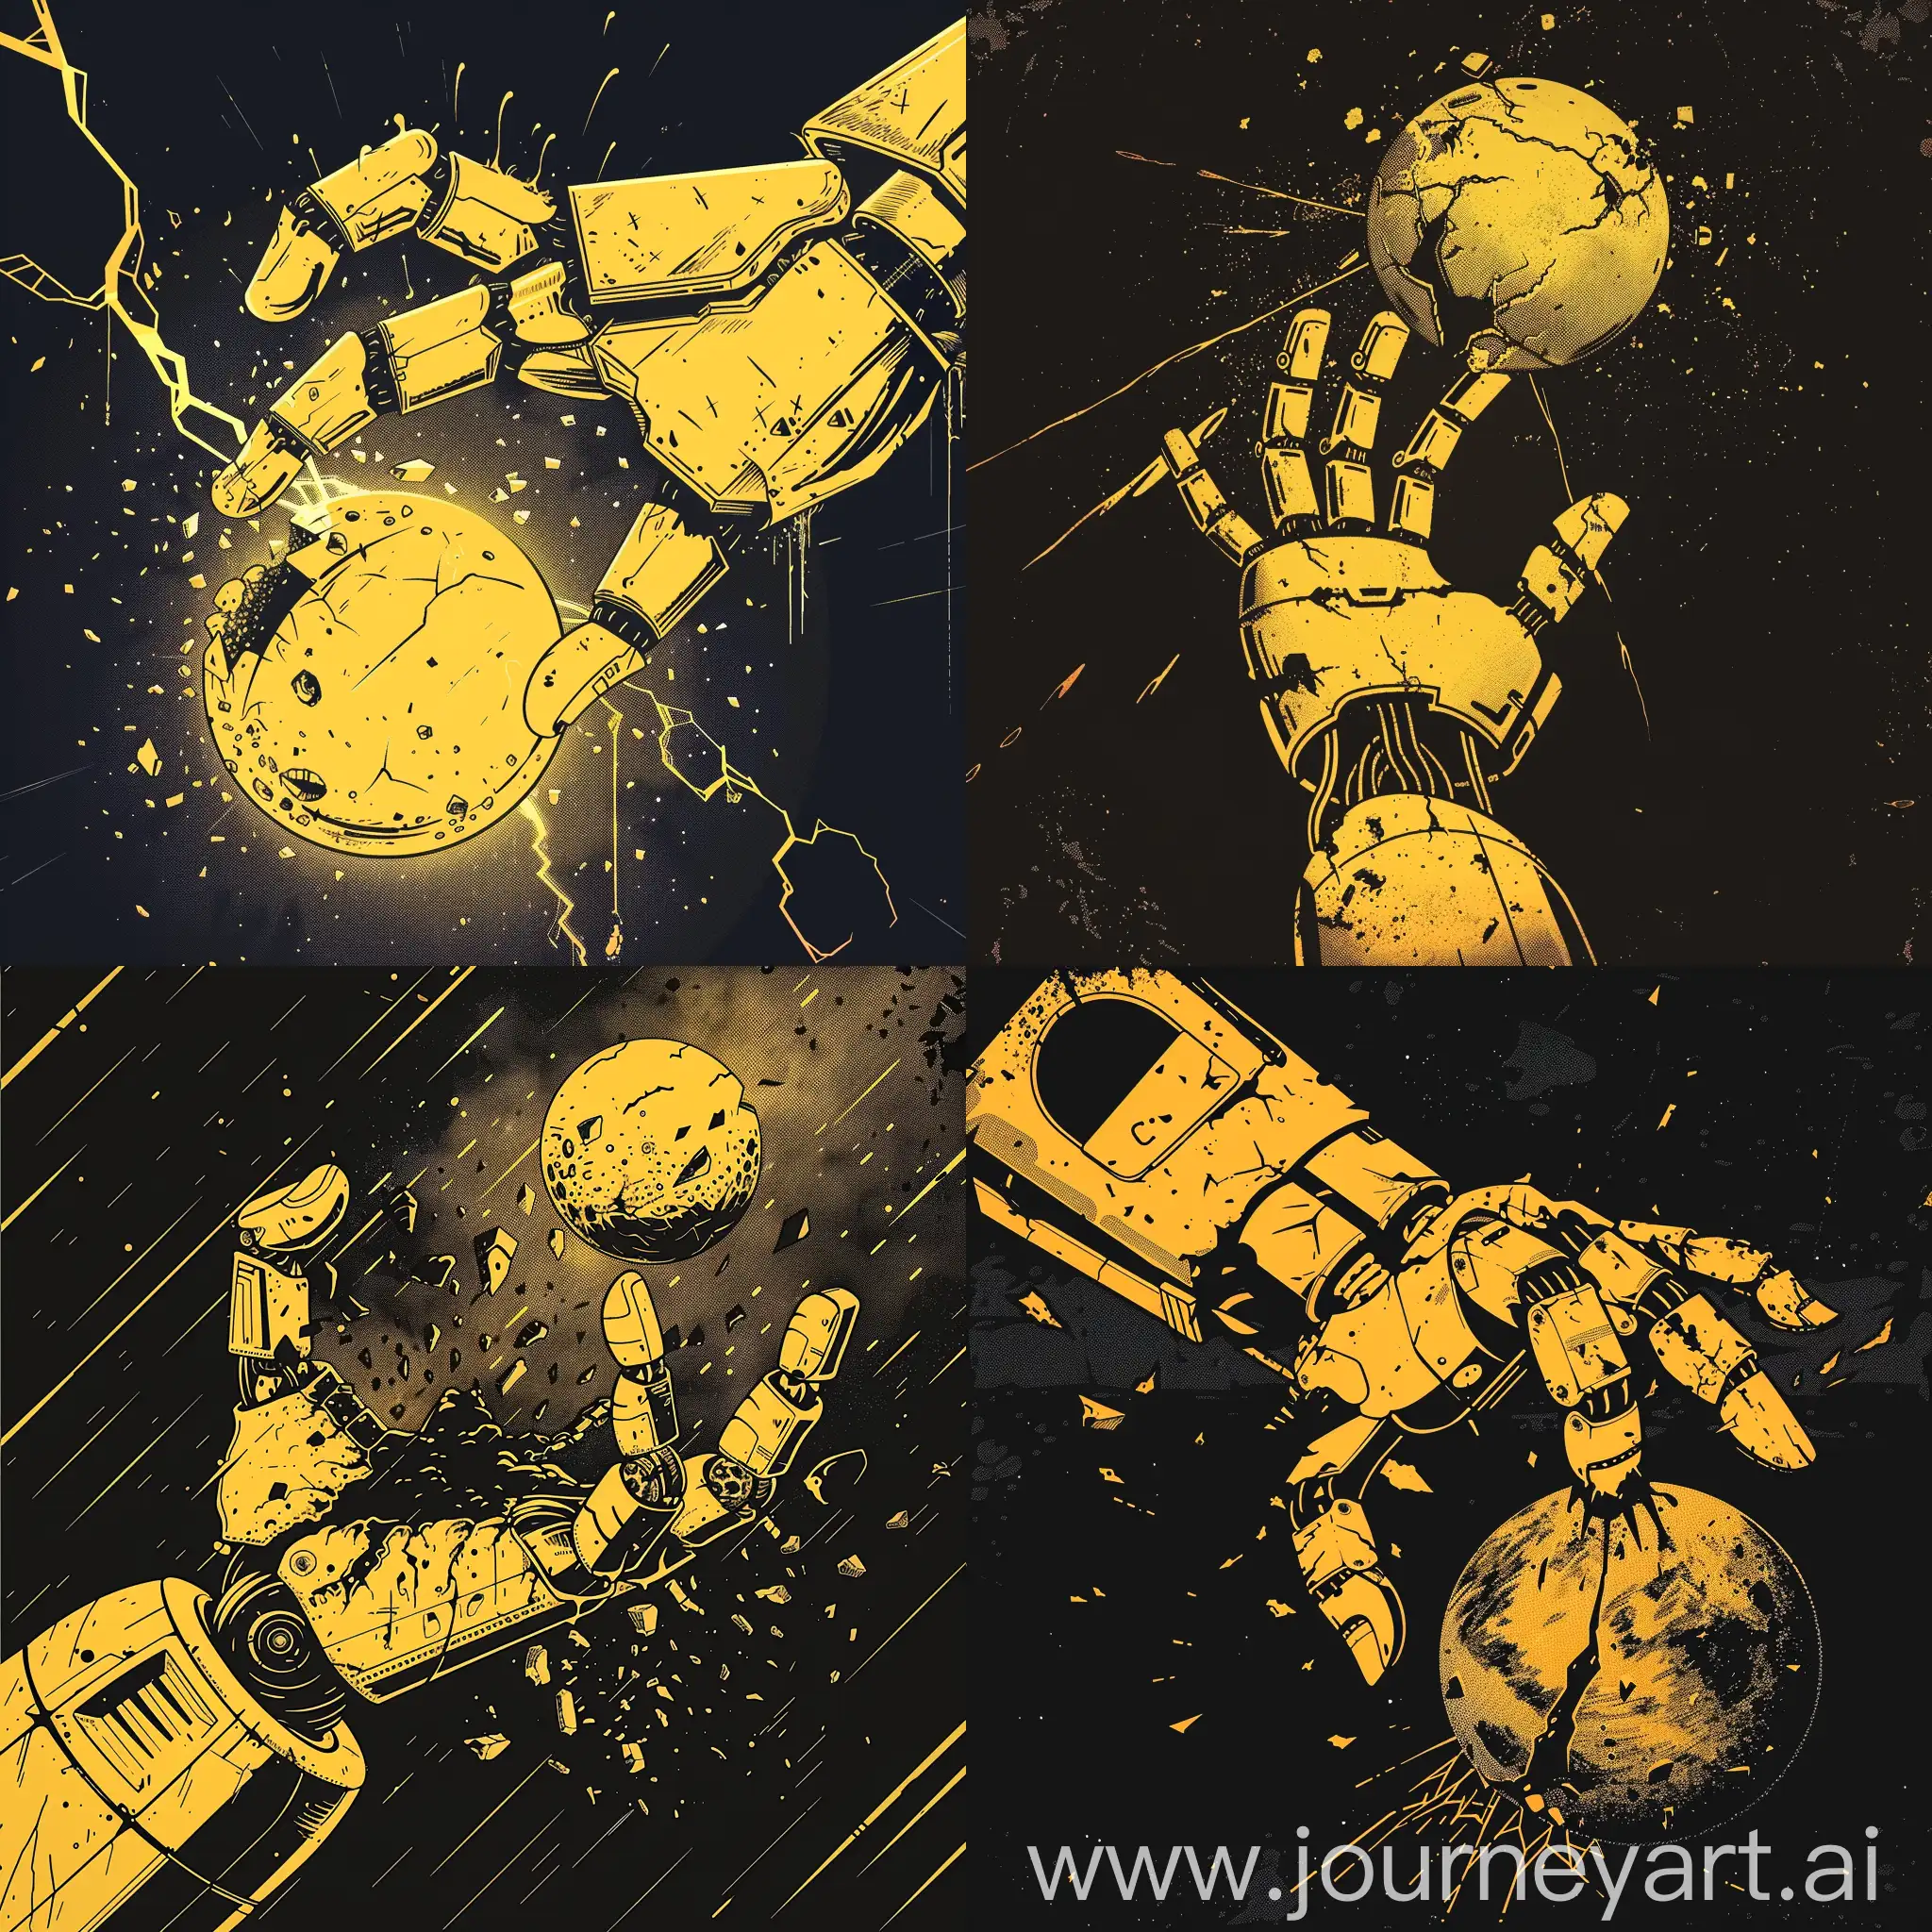 Epic-Robot-Hand-Gripping-Cracking-Planet-in-Yellow-Silhouette